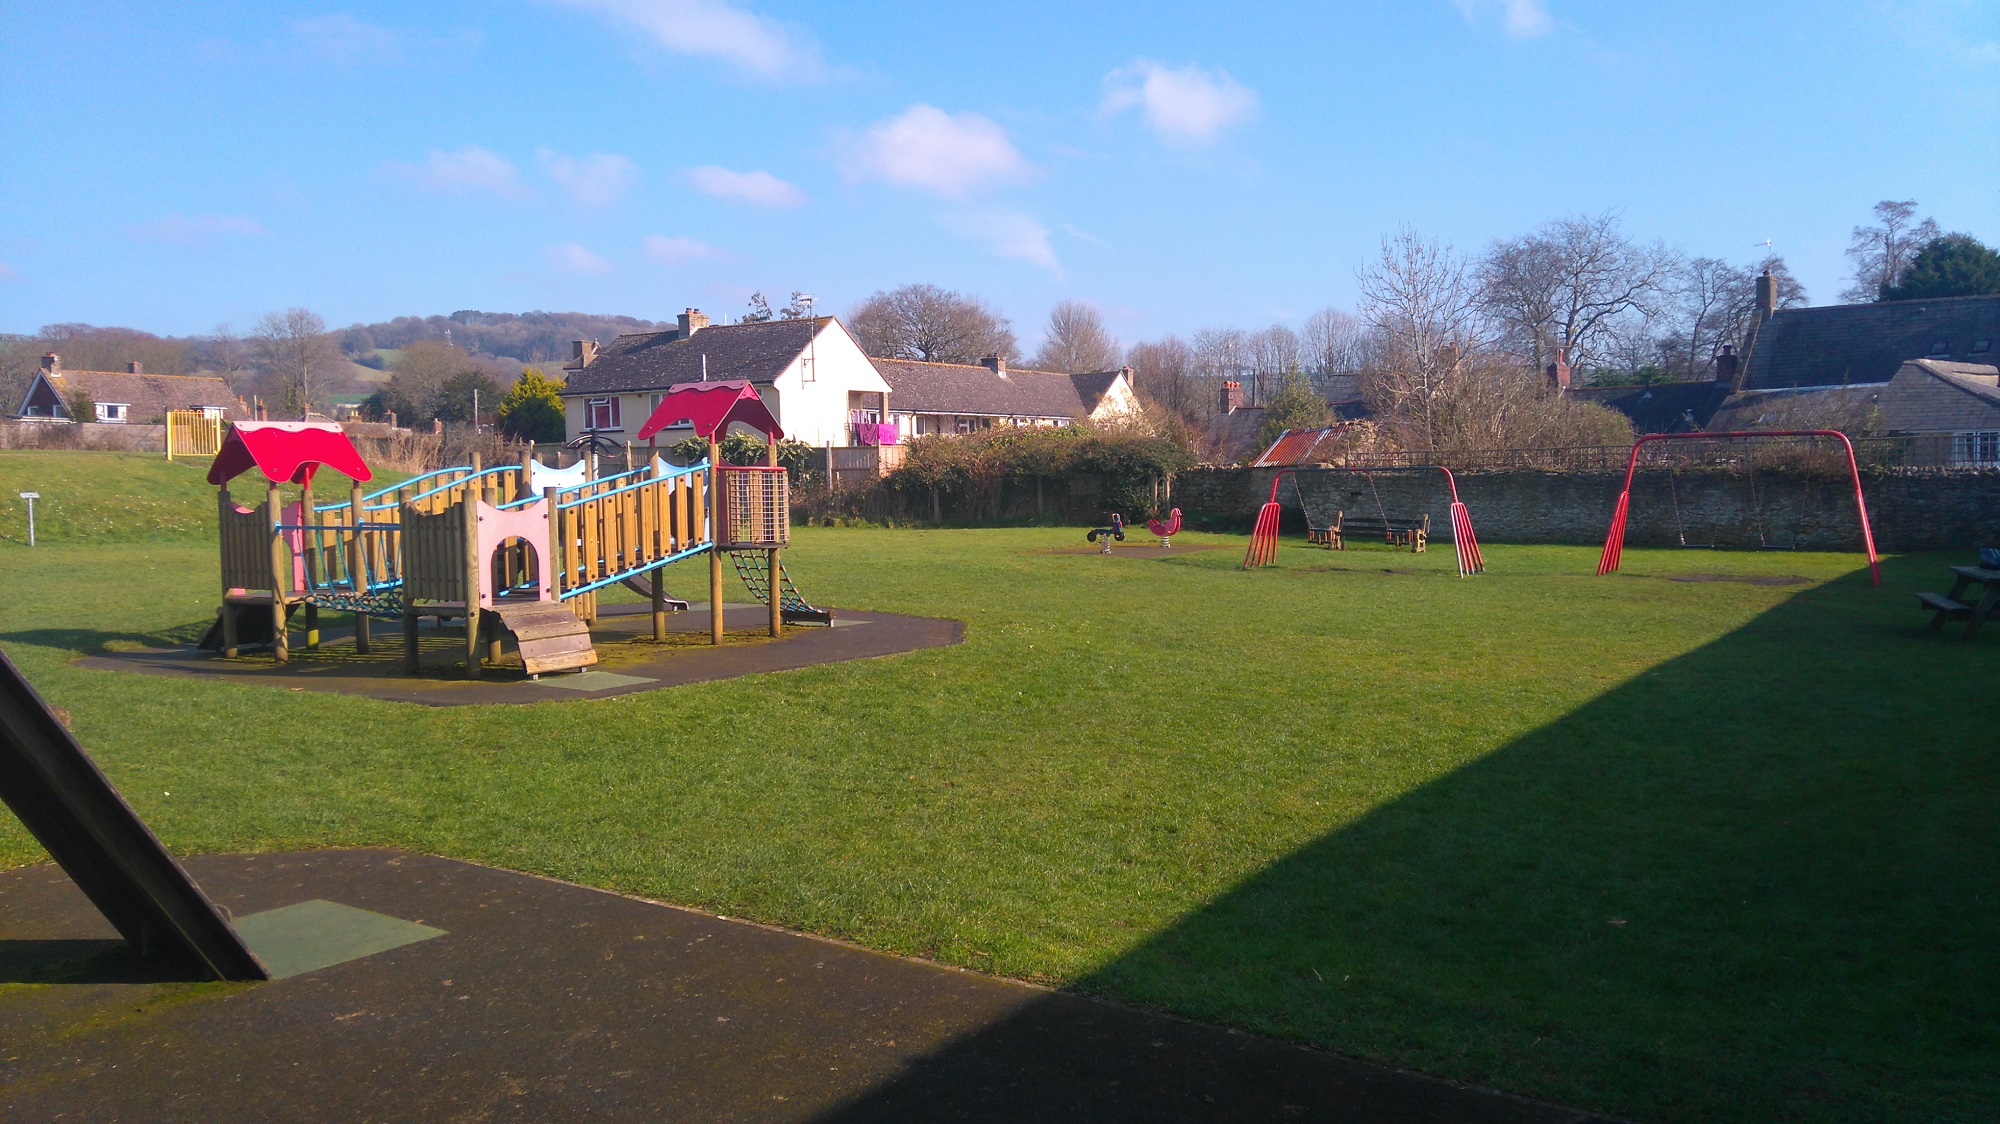 A playpark with climbing area and swings on a sunny day. A rural hill is visible in the background, while houses are present at the far end of the park.